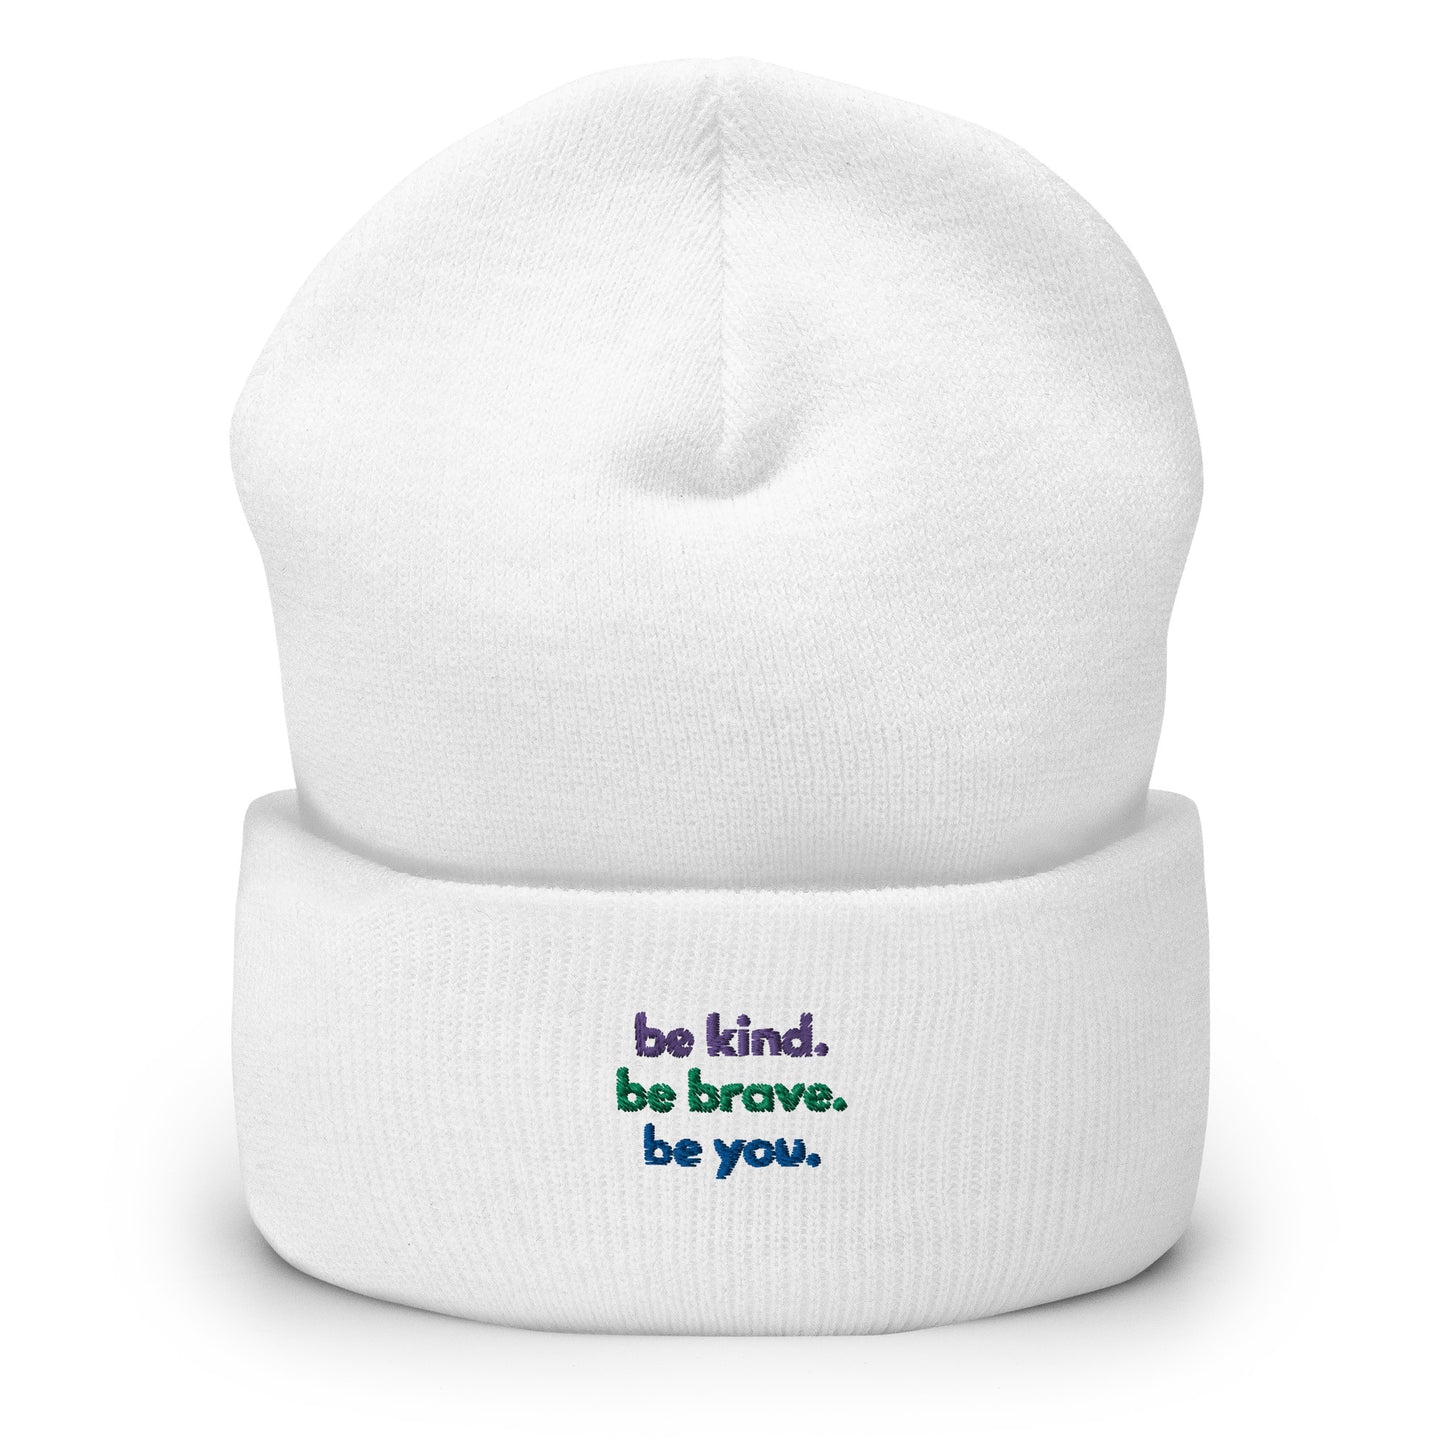 Cuffed Beanie - be kind. be brave. be you.